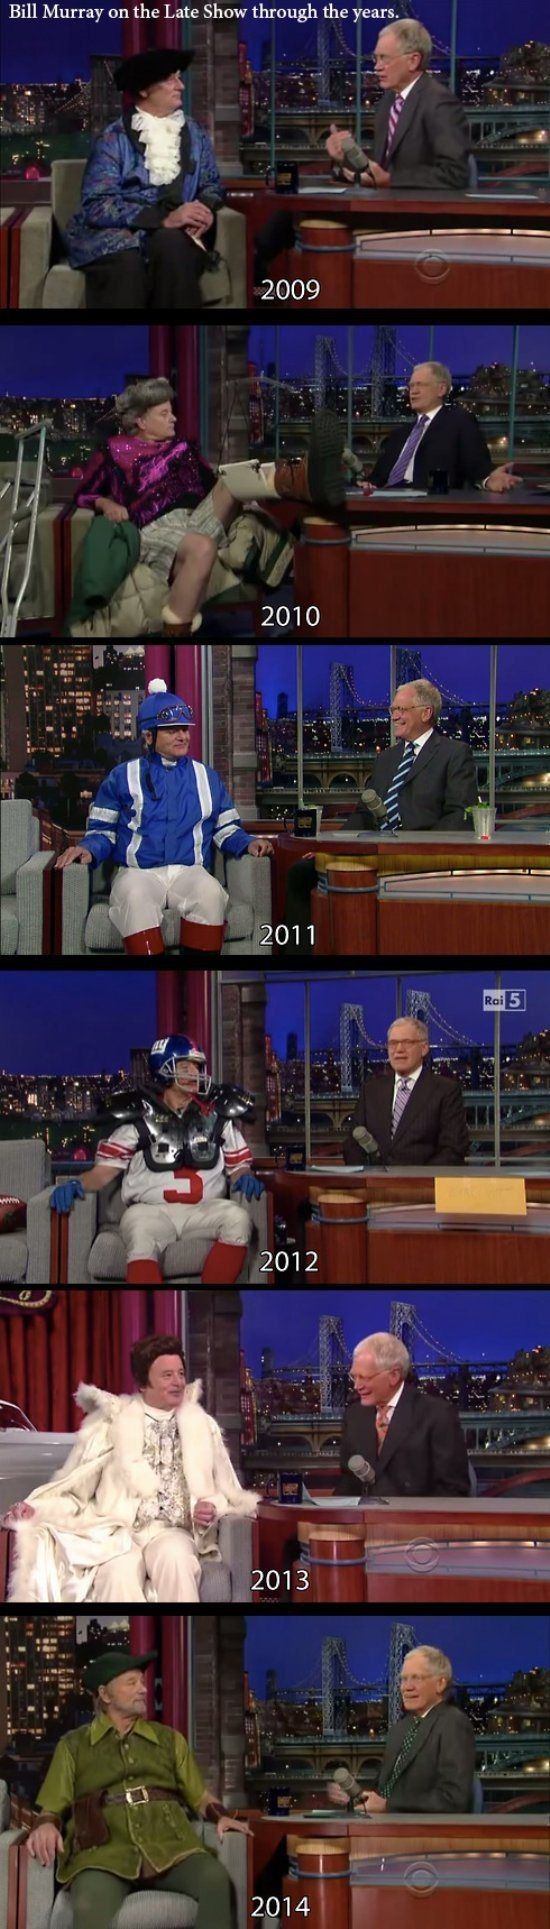 Bill Murray on the Late Show through the years